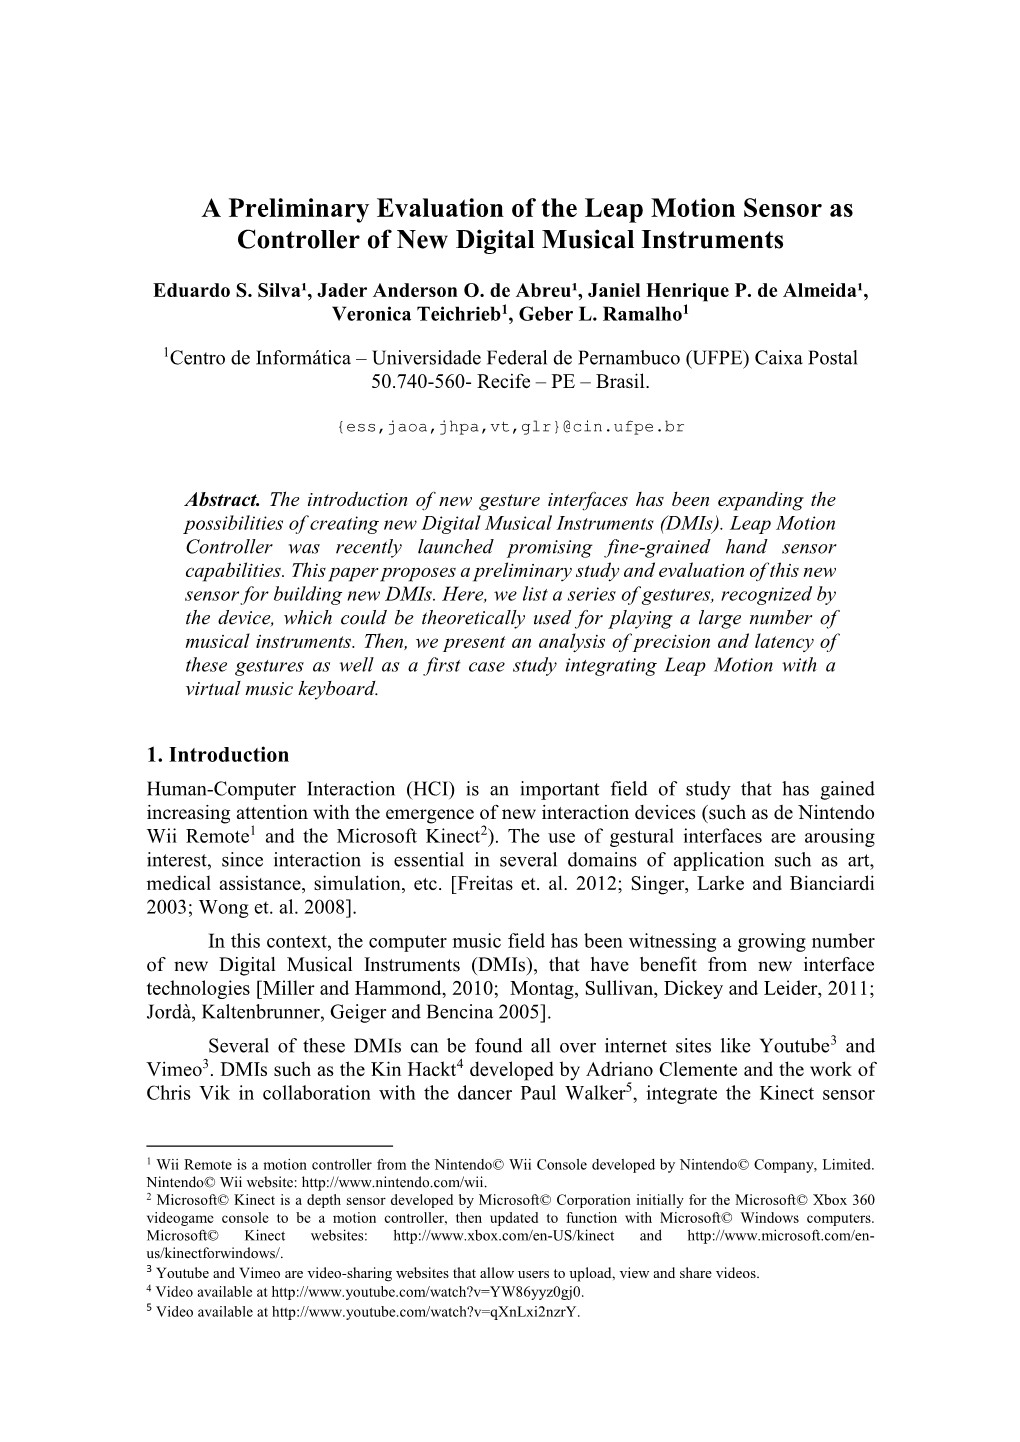 A Preliminary Evaluation of the Leap Motion Sensor As Controller of New Digital Musical Instruments